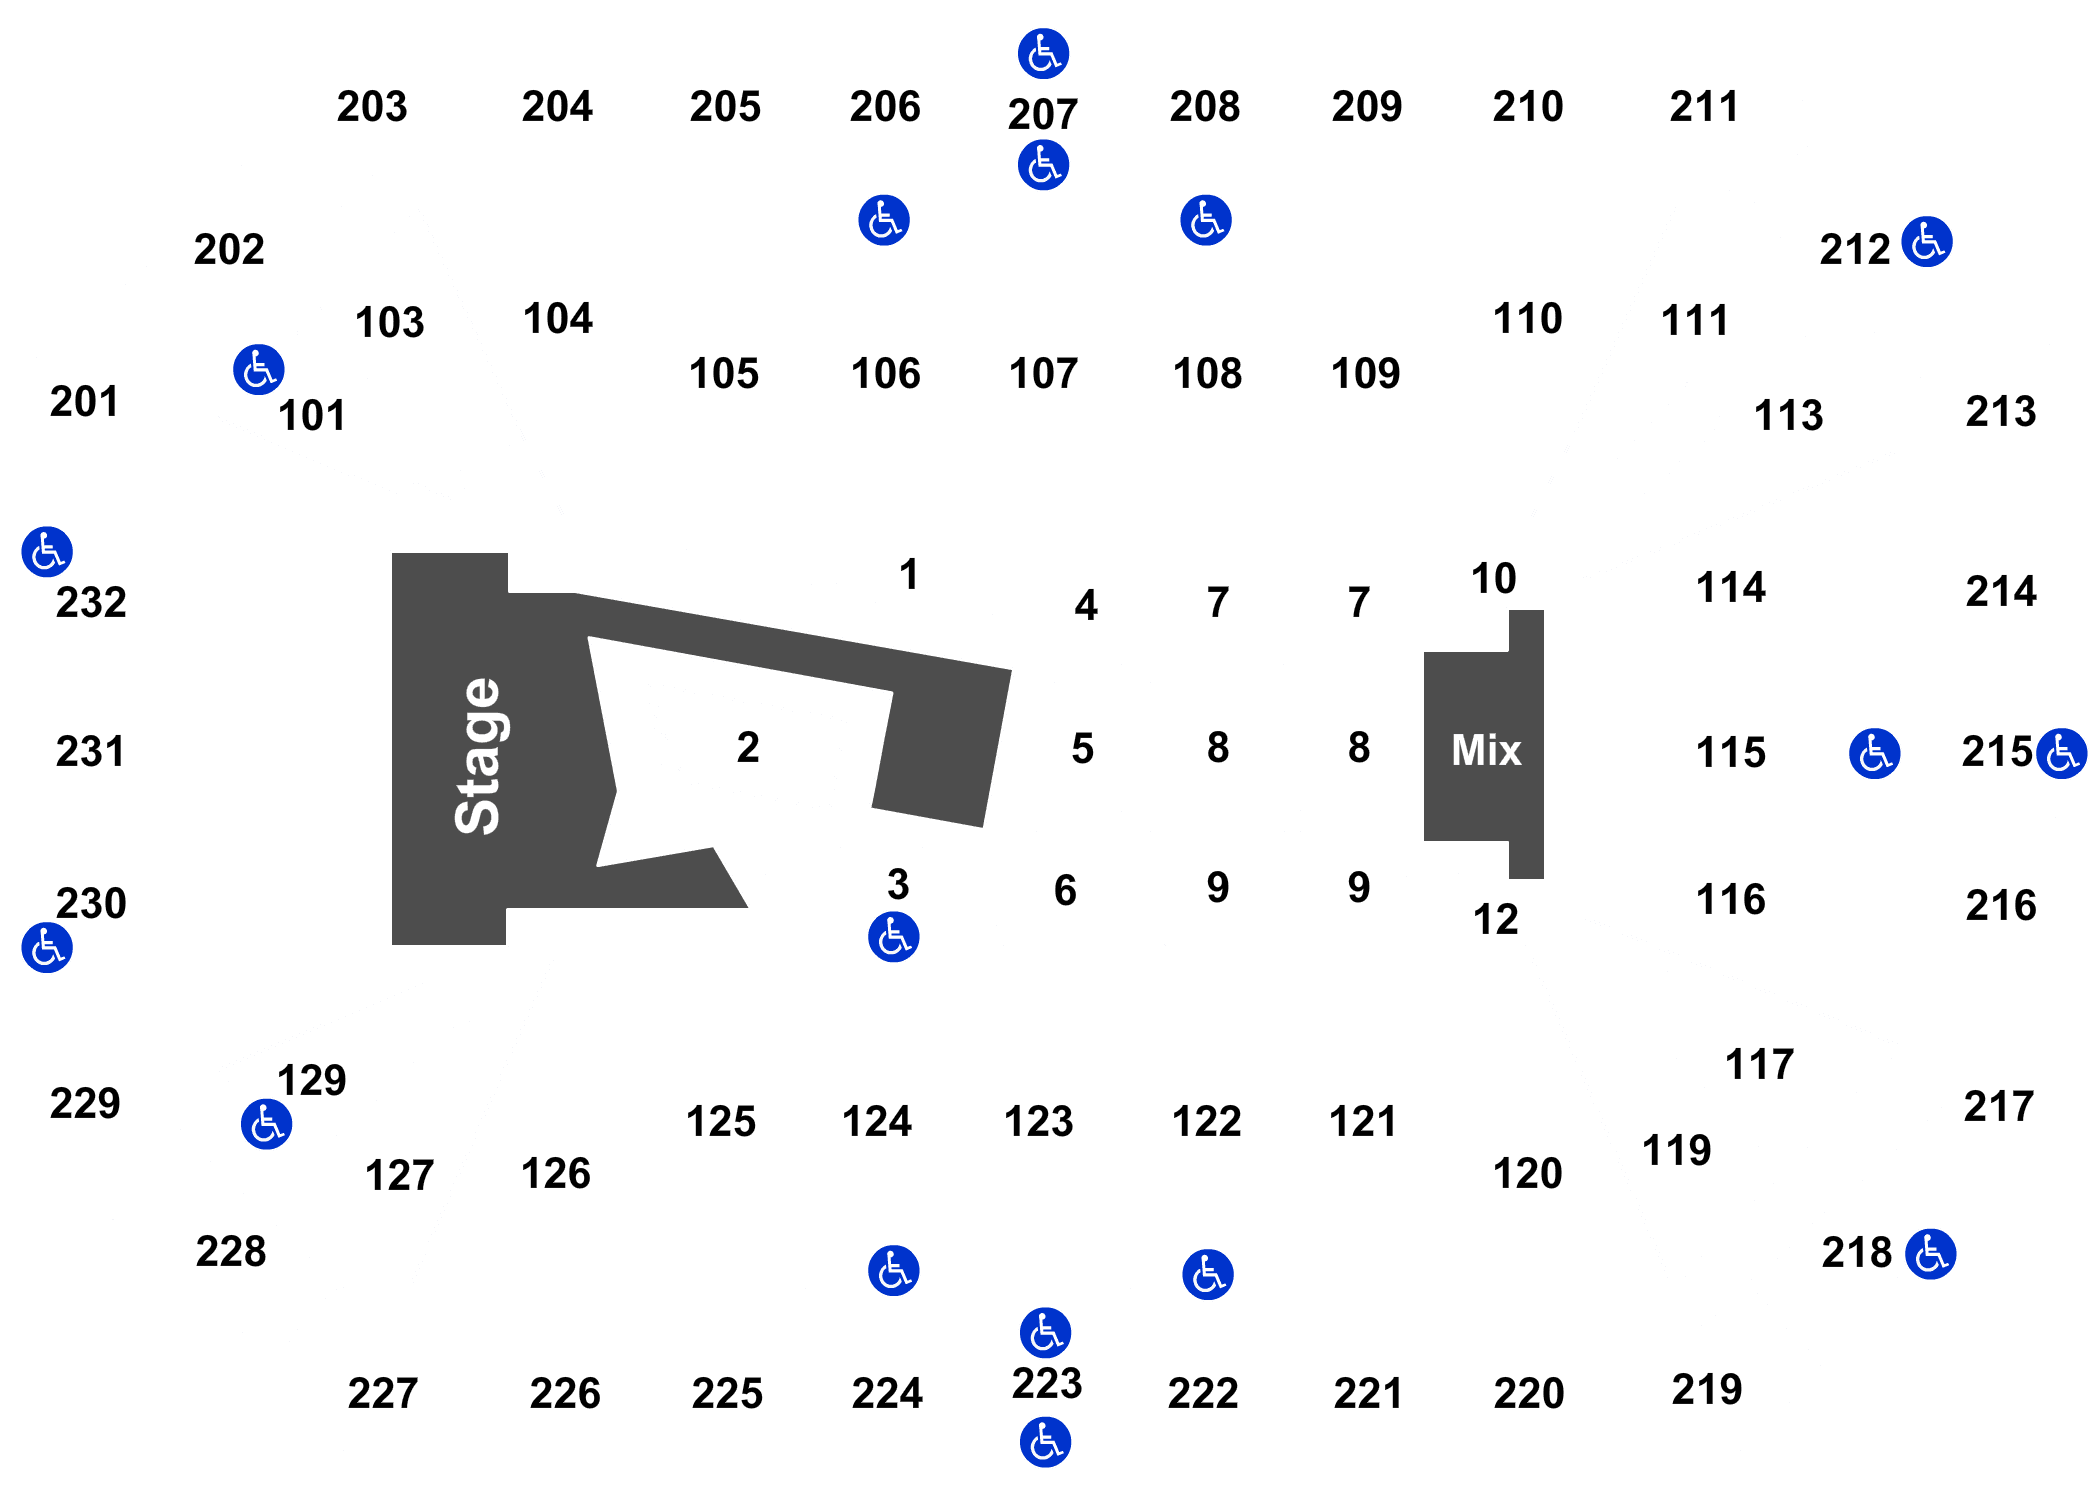 Dickies Arena Fort Worth Tx Seating Chart